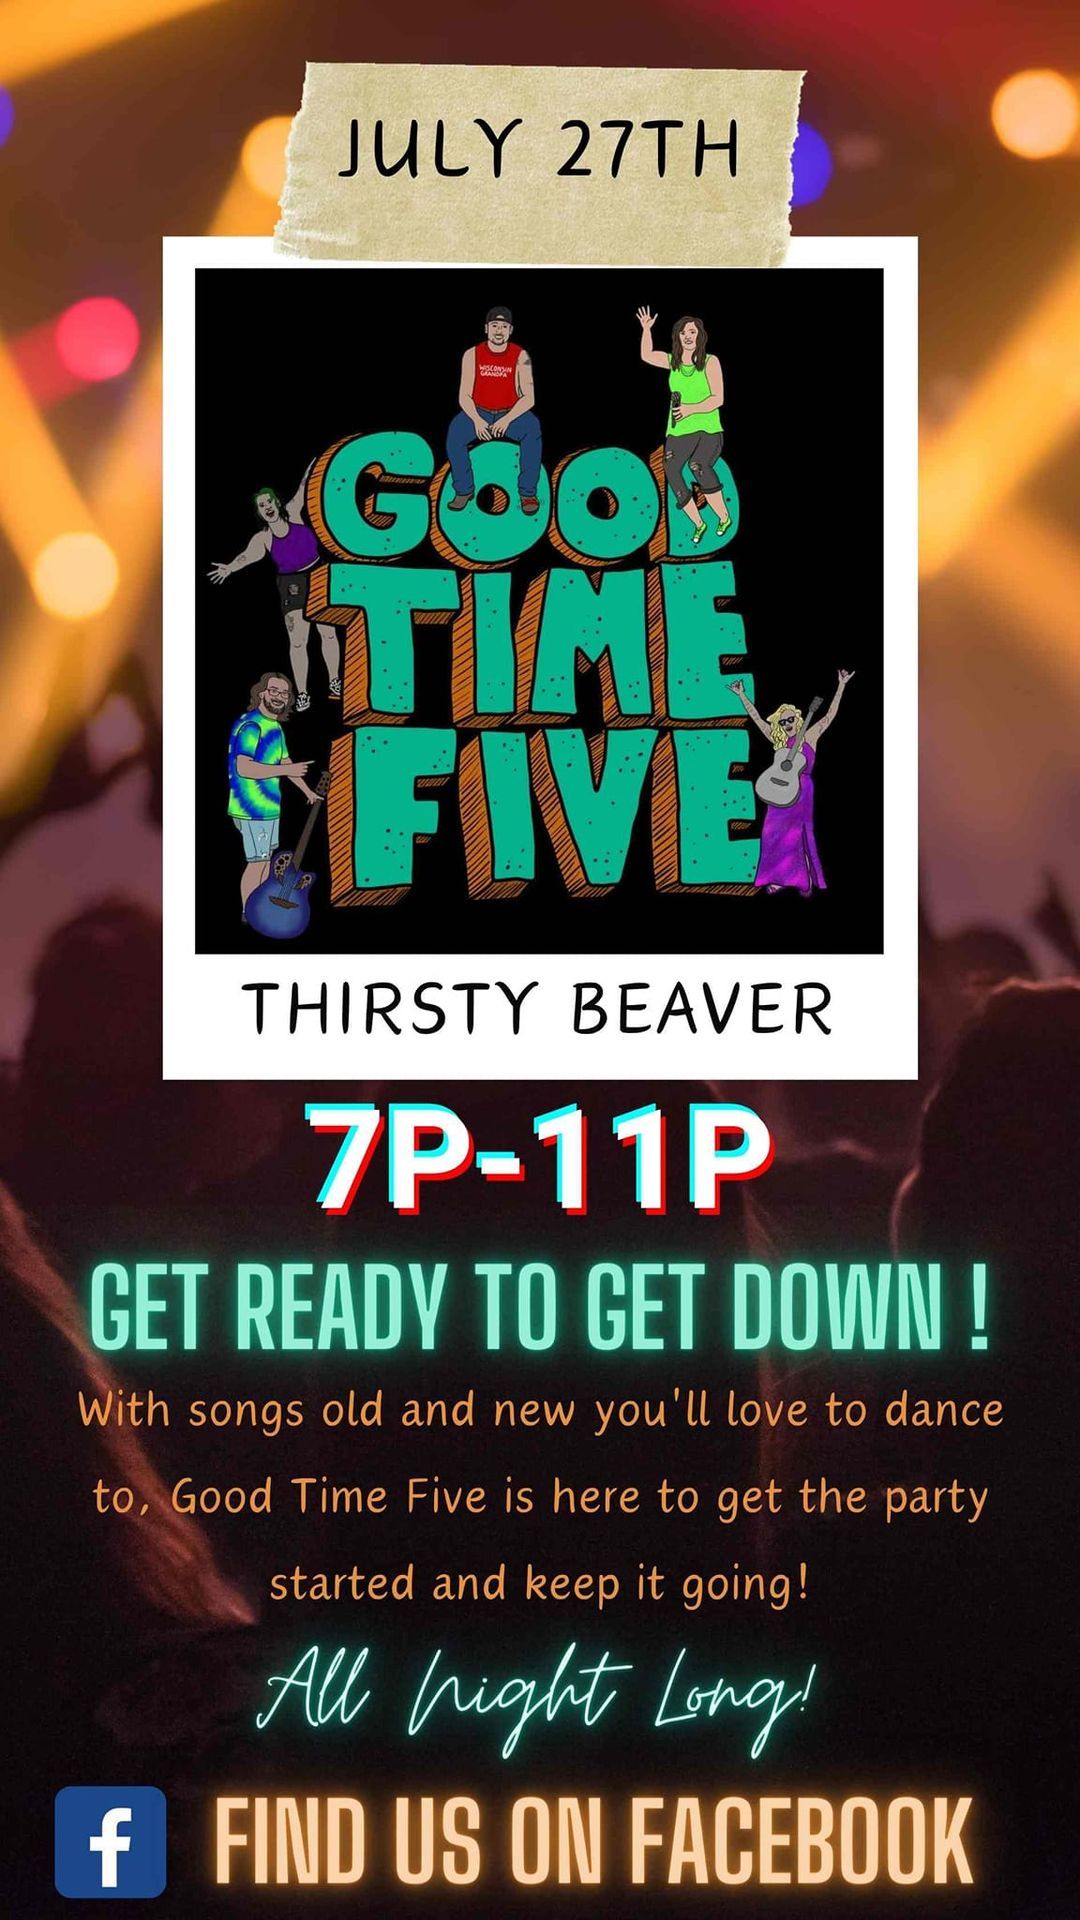 Good Time Five @ Thirsty Beaver 